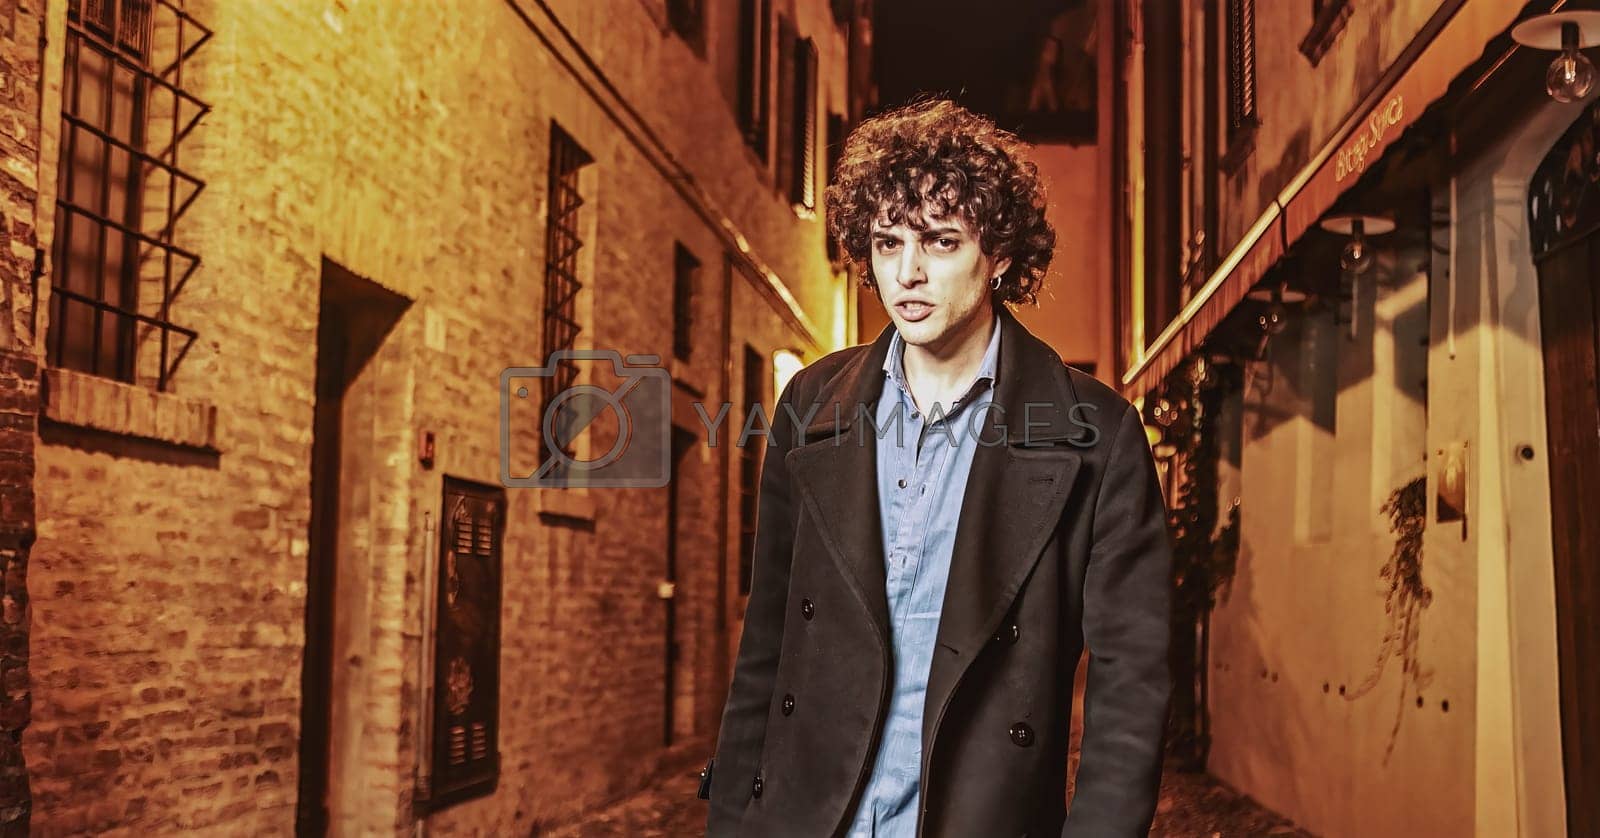 Royalty free image of Angry Young Man in Night Alley by pippocarlot